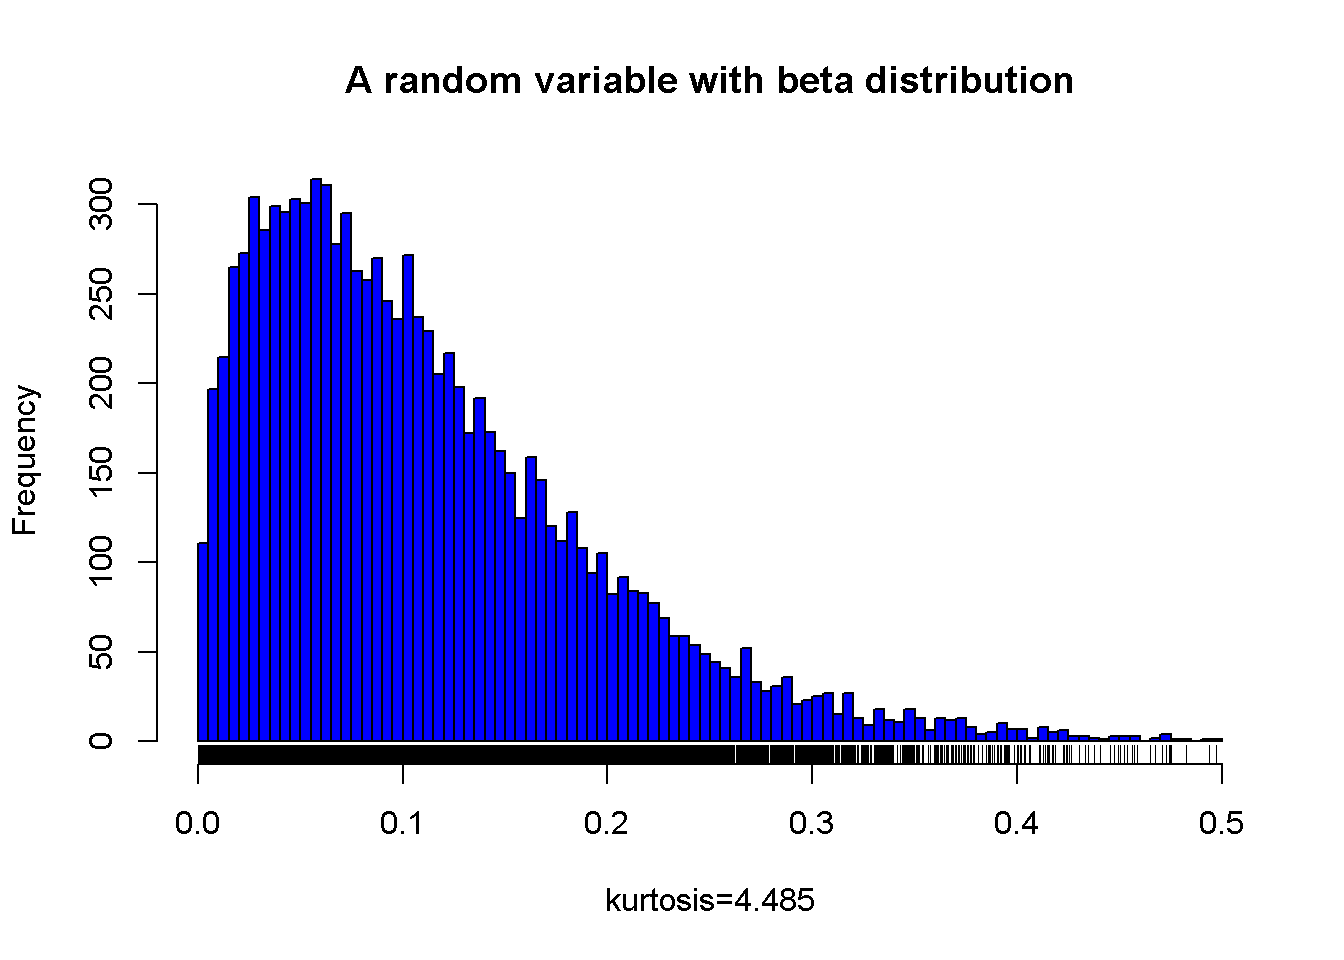 A random variable with right skewed distribution